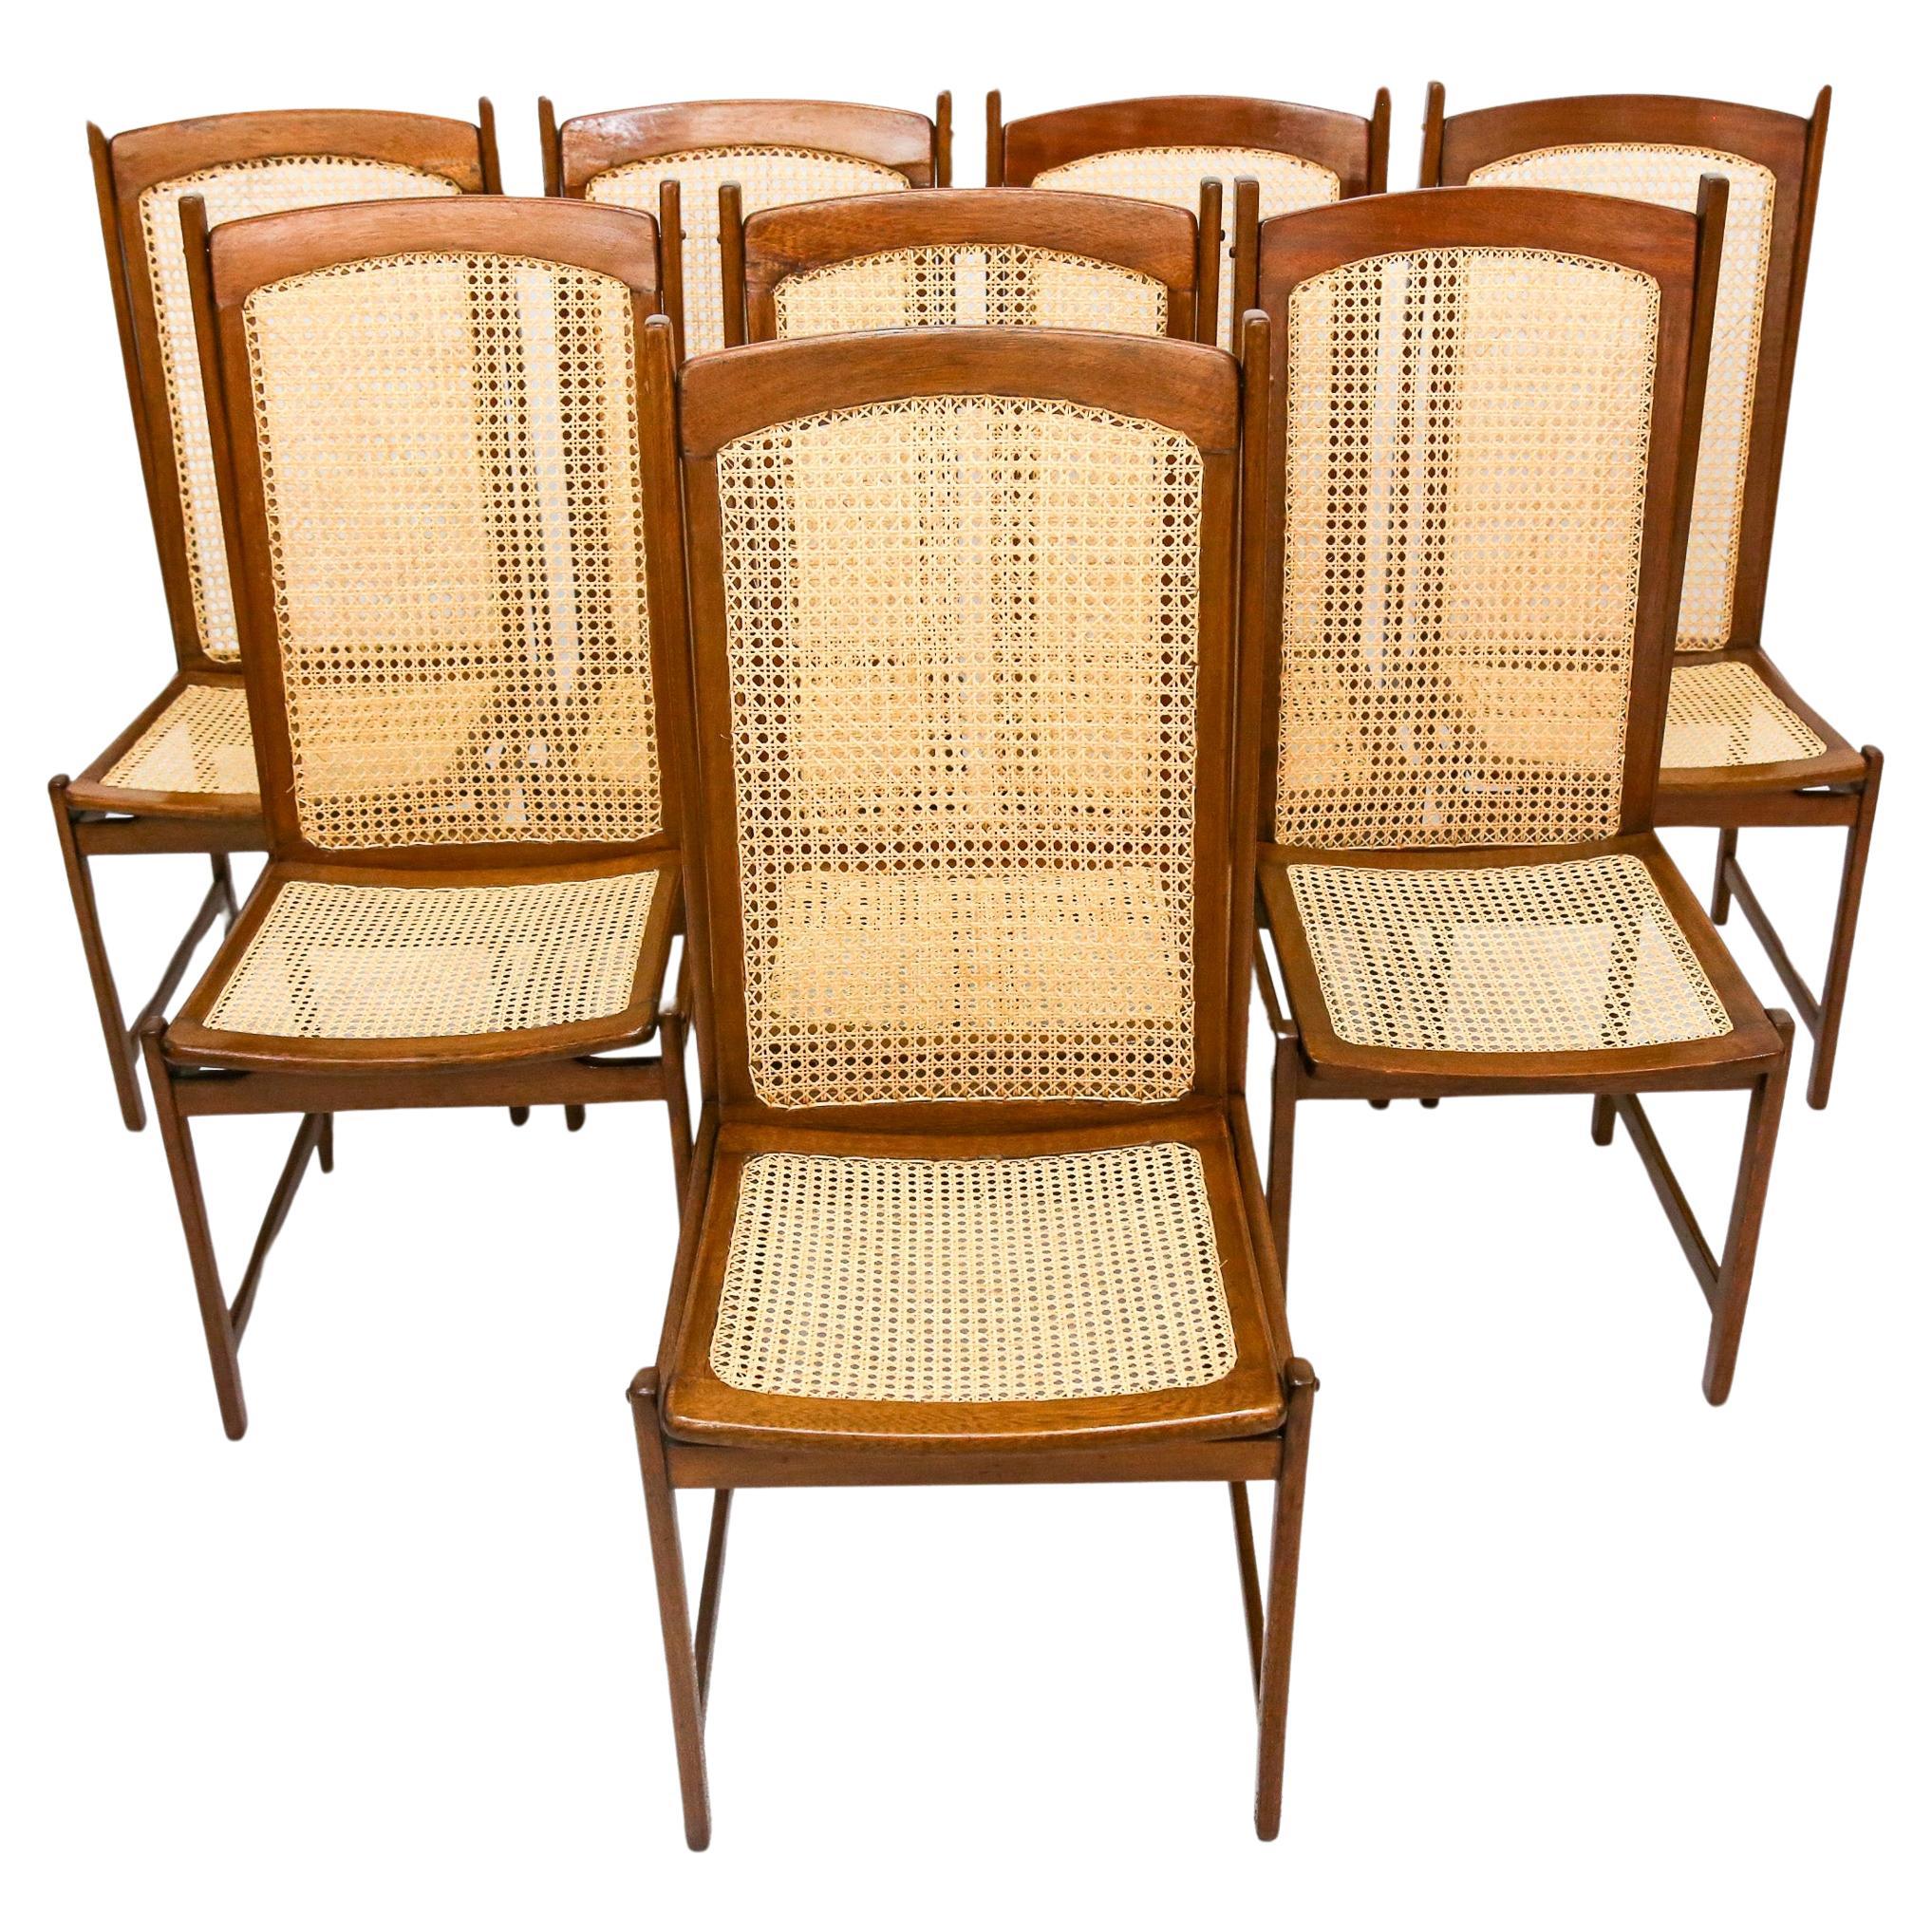 Mid-Century Modern Dining Chair Set in Hardwood & Caning, Celina, Brazil, 1960s